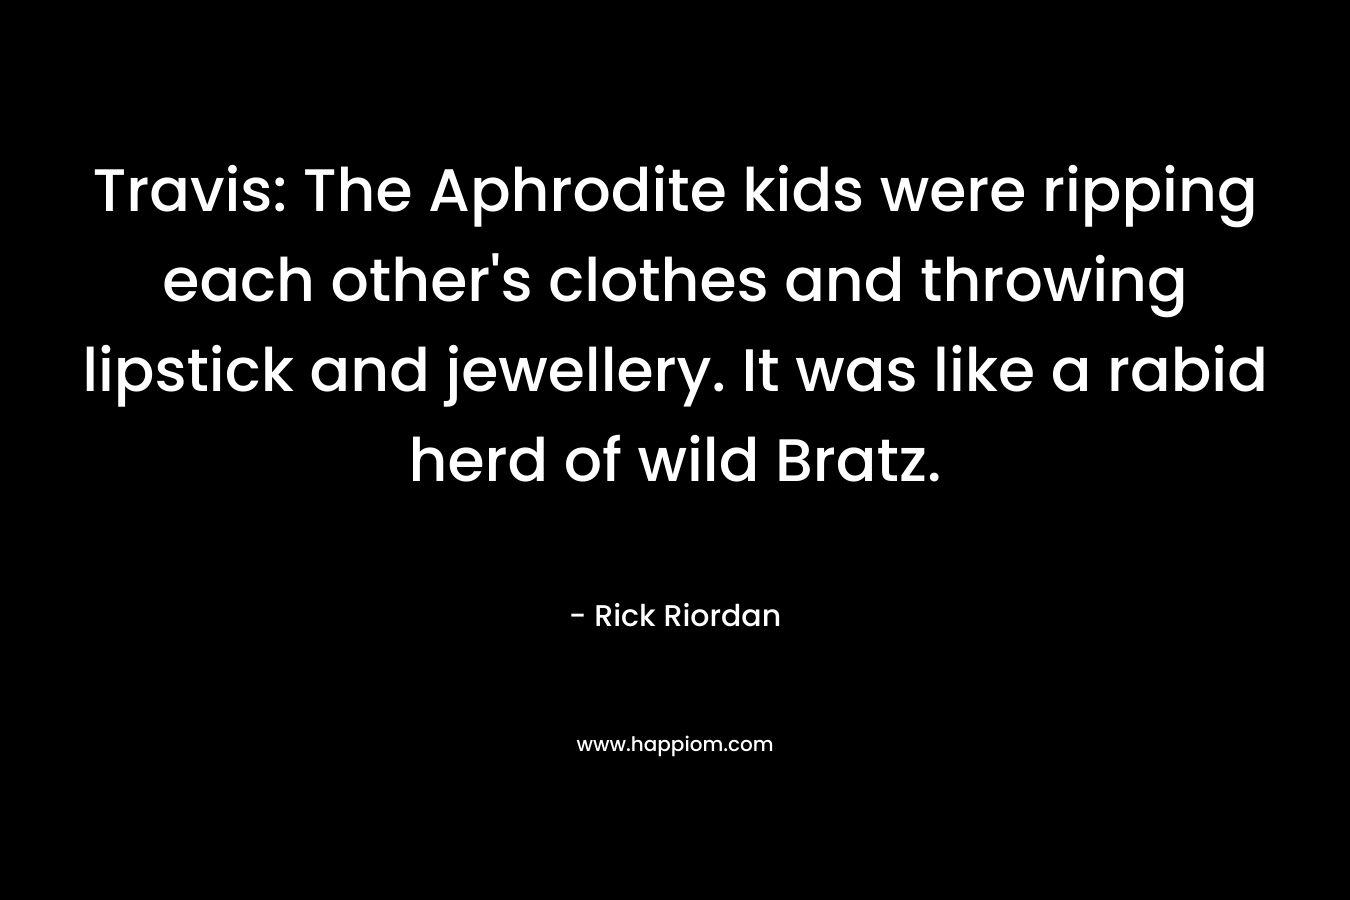 Travis: The Aphrodite kids were ripping each other's clothes and throwing lipstick and jewellery. It was like a rabid herd of wild Bratz.